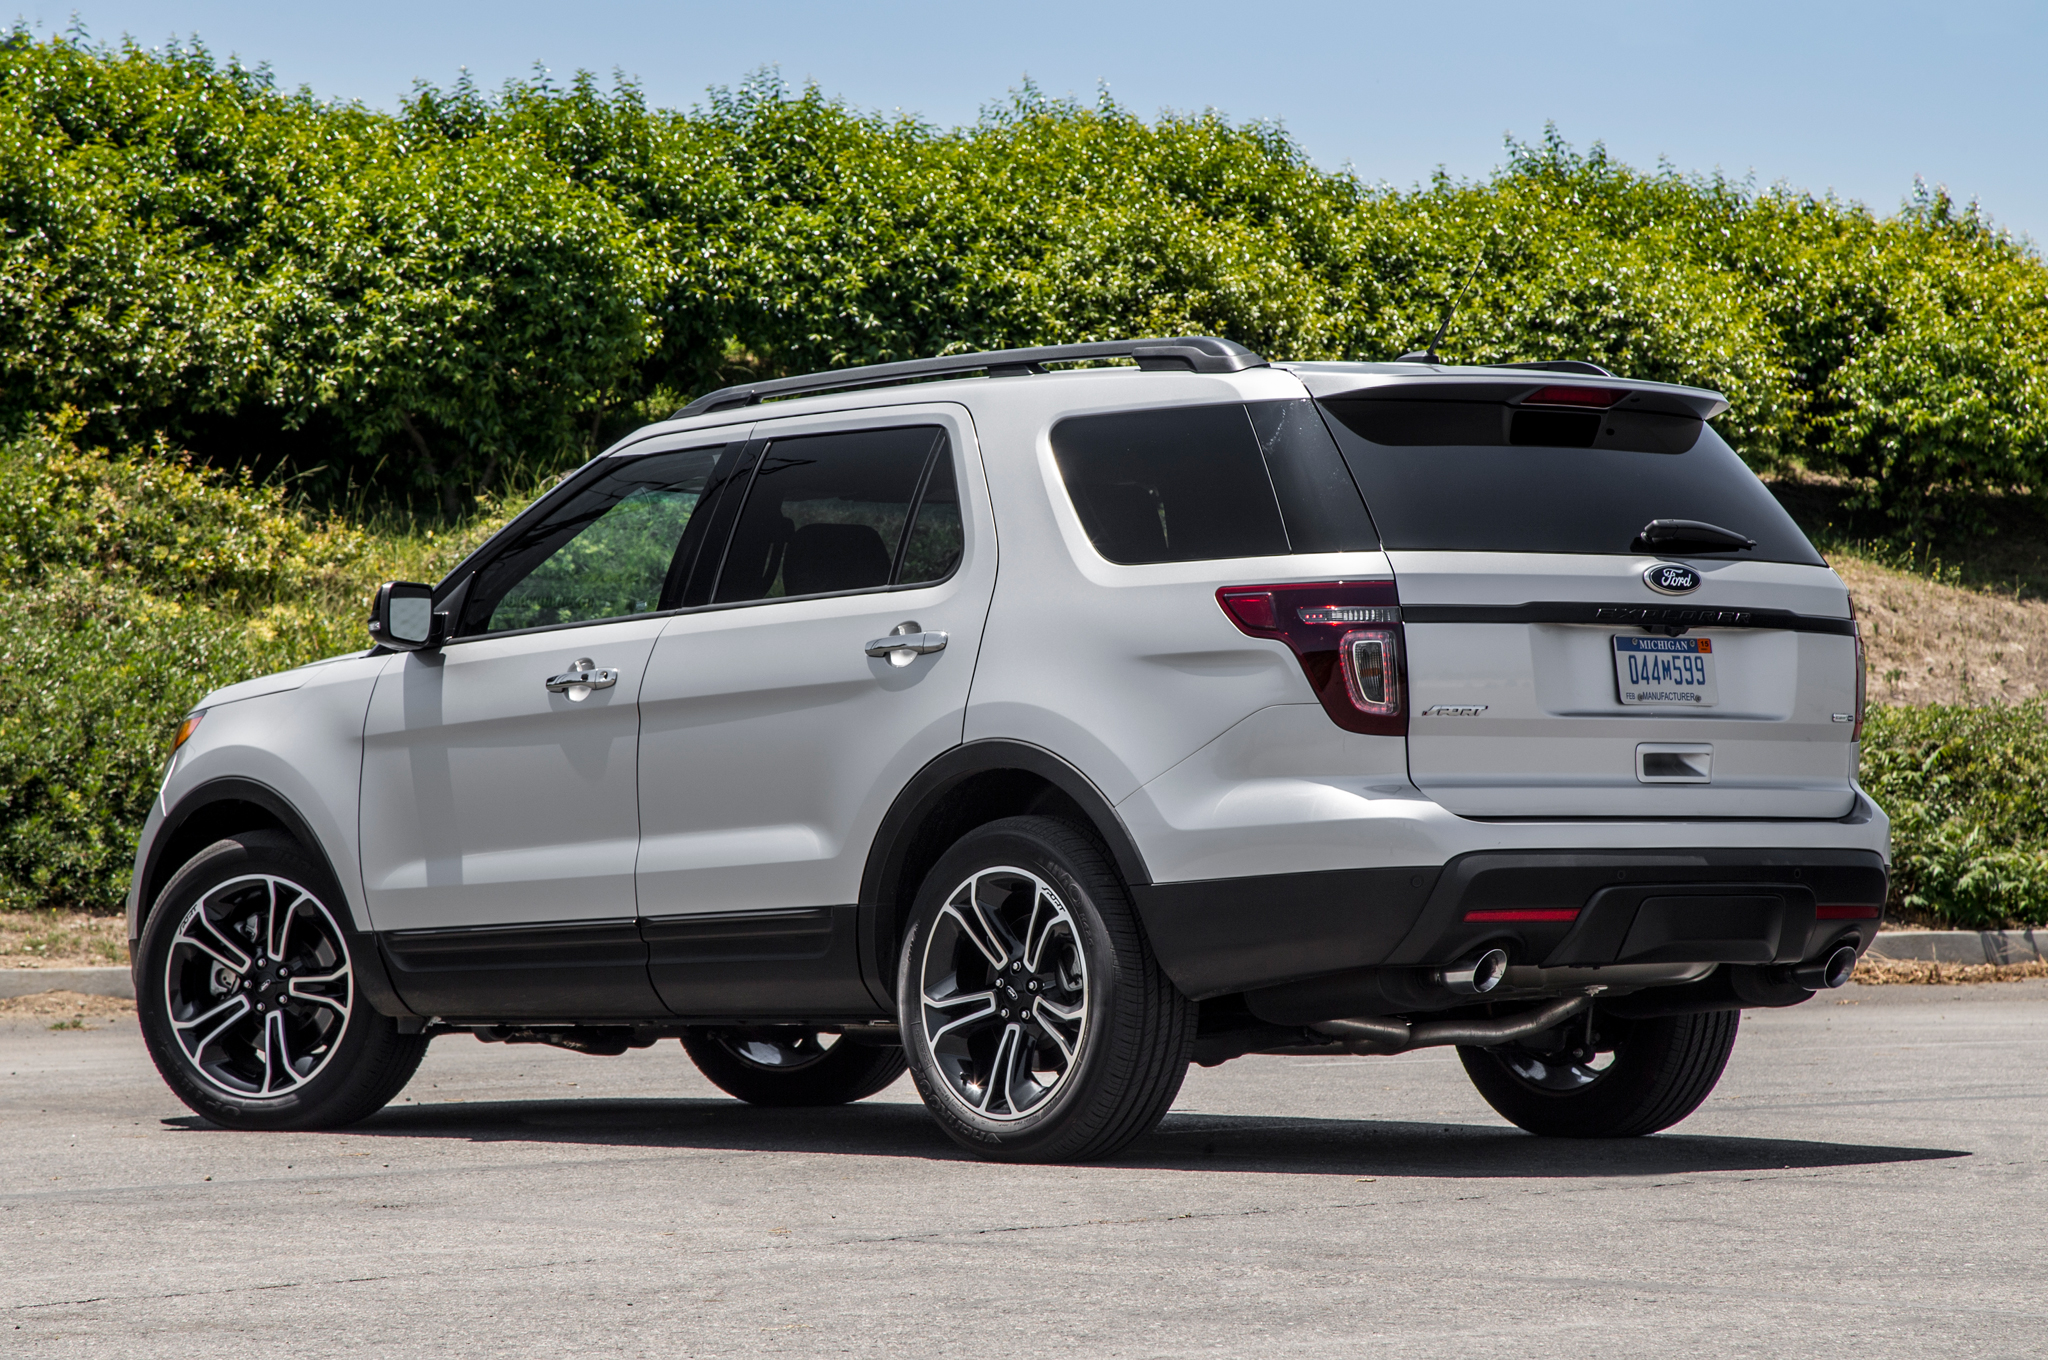 Ford Explorer Sport Wallpapers Vehicles Hq Ford Explorer Sport Pictures 4k Wallpapers 2019